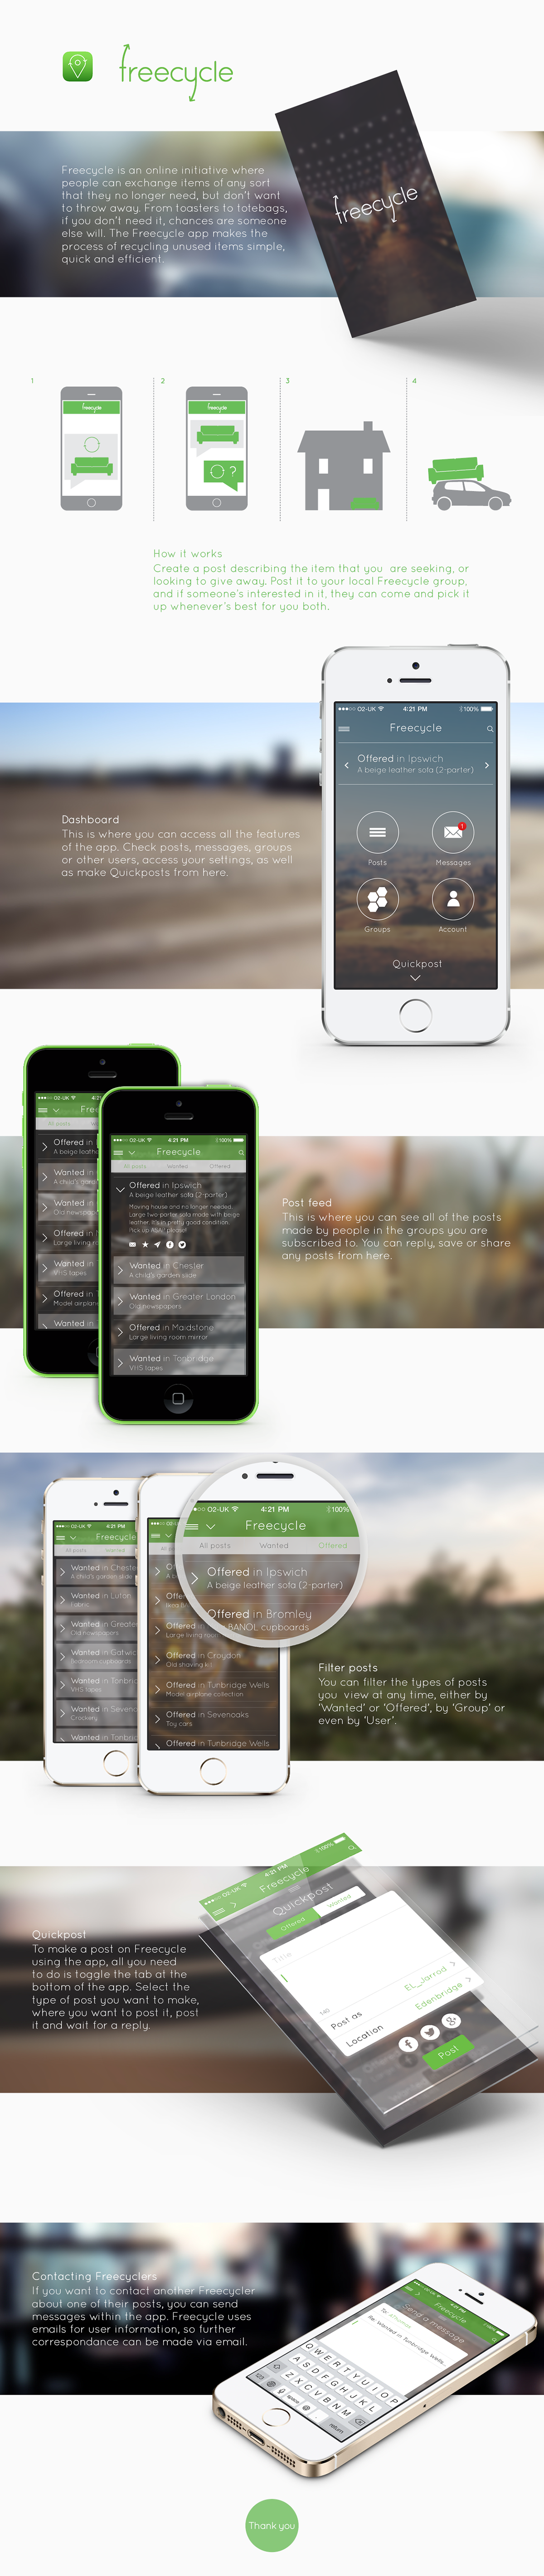 freecycle app application ios ios7 apple iphone free recycle design